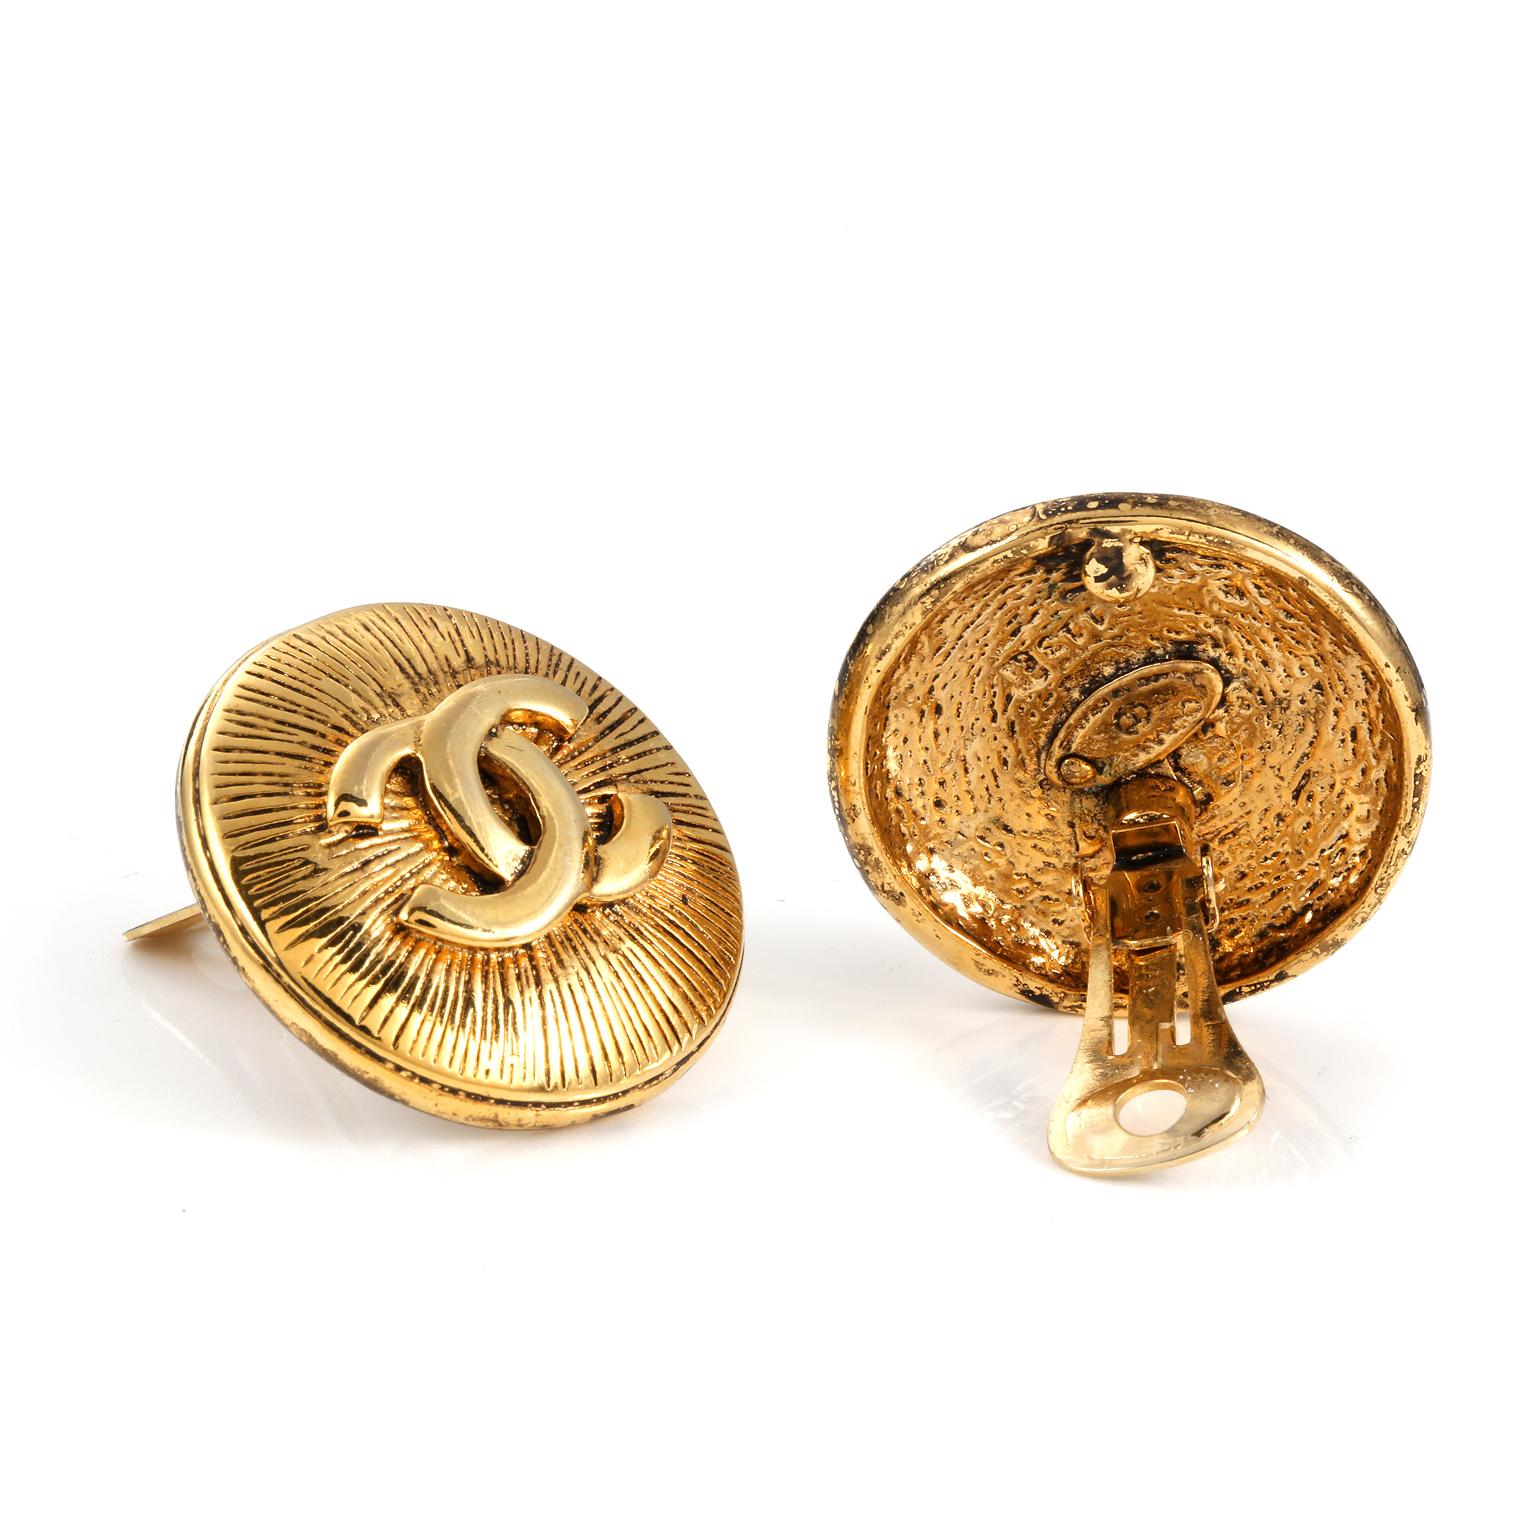 These authentic Chanel Gold CC Grooved Earrings are in very good vintage condition from the 1980’s. Circular gold etched background with interlocking CC in the center.    Clip on closure. Pouch or box included. 
Proudly offered for $1,100.00 from